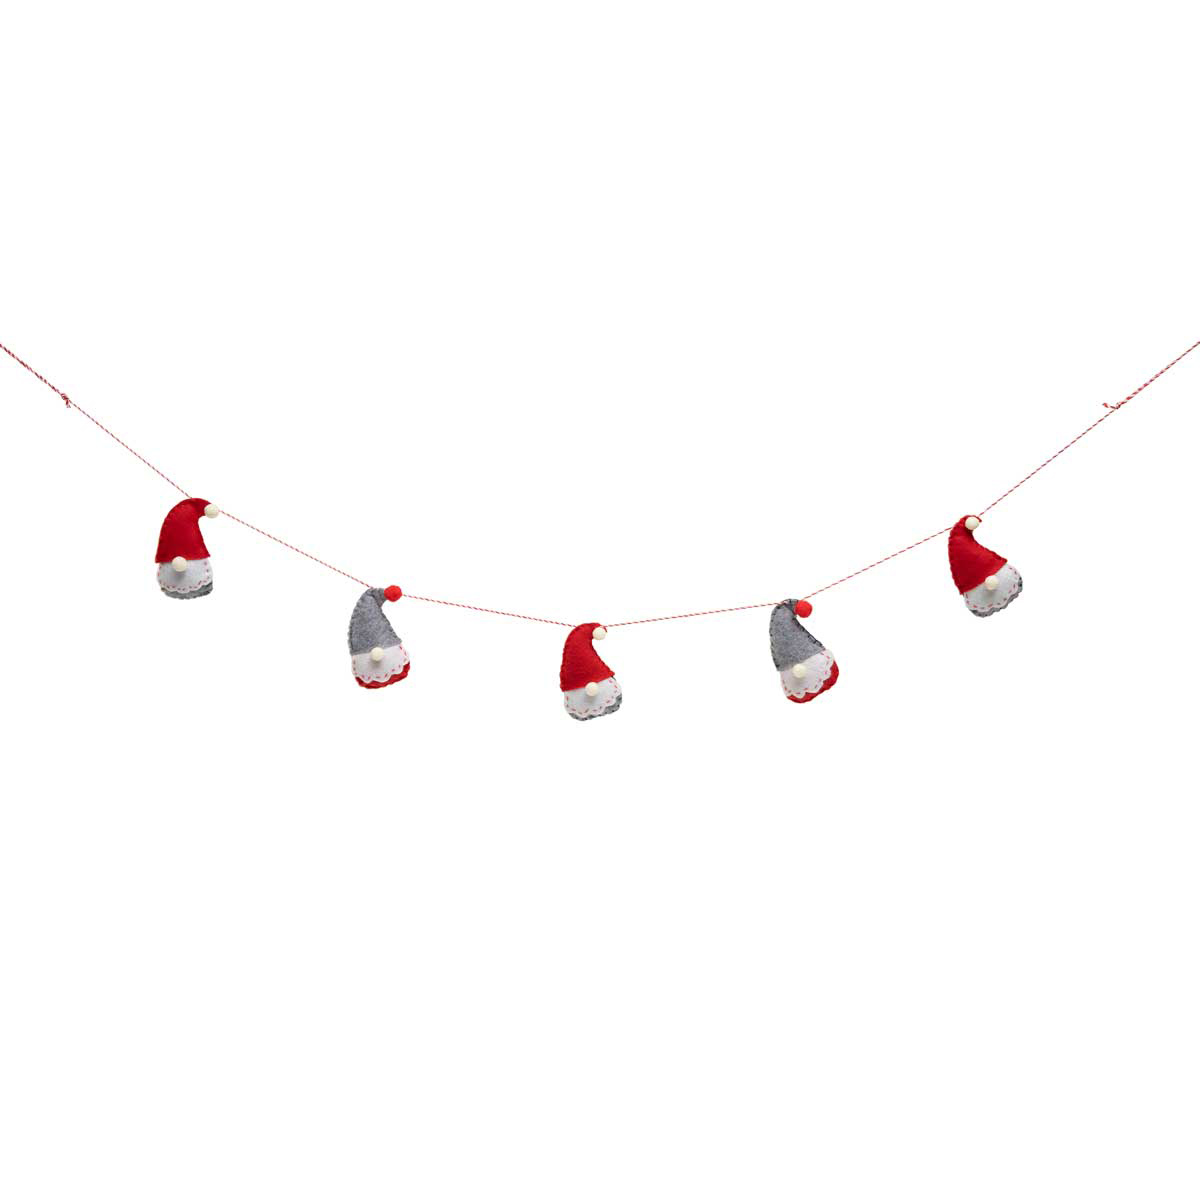 b50 GARLAND SCANDIA 3 GNOME 2.5IN X 1.5IN X 3.75IN/48IN - Click Image to Close